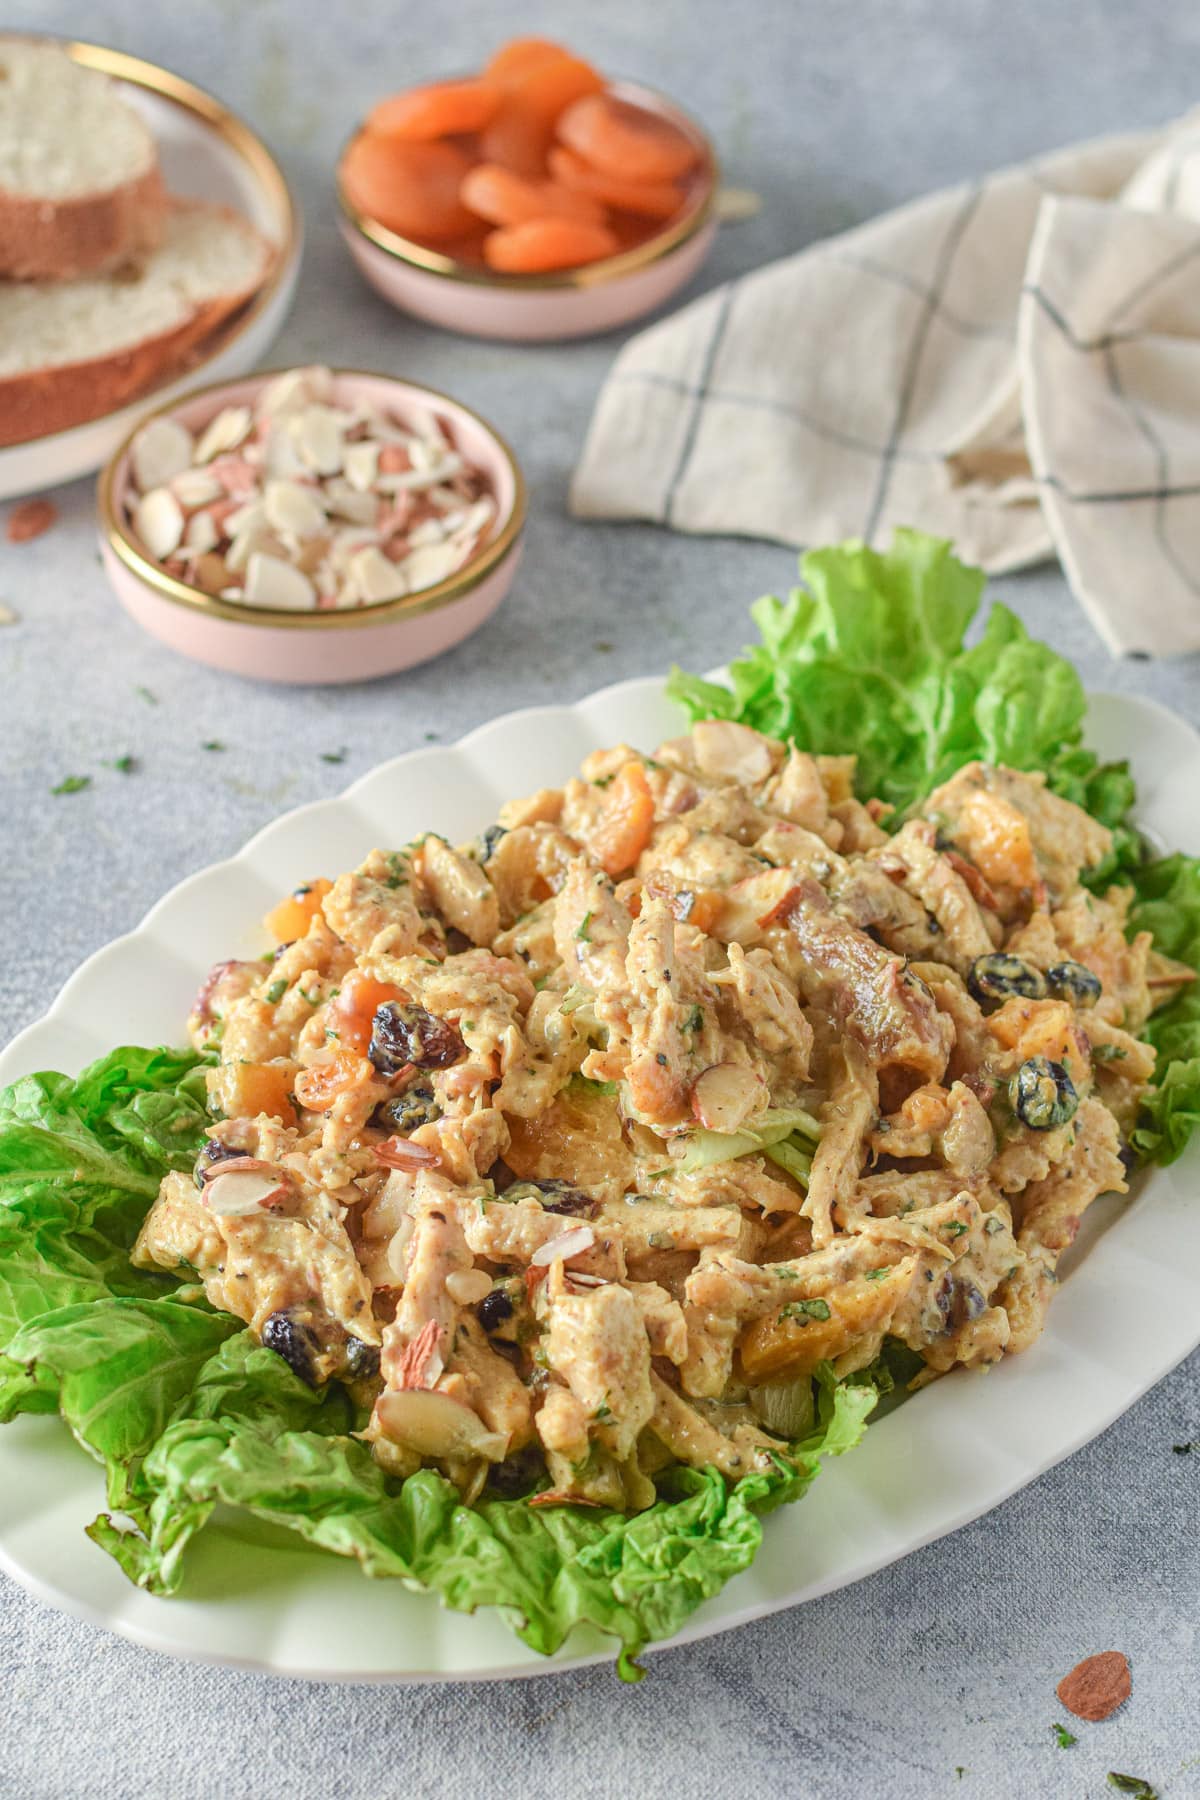 Coronation chicken on bed of lettuce